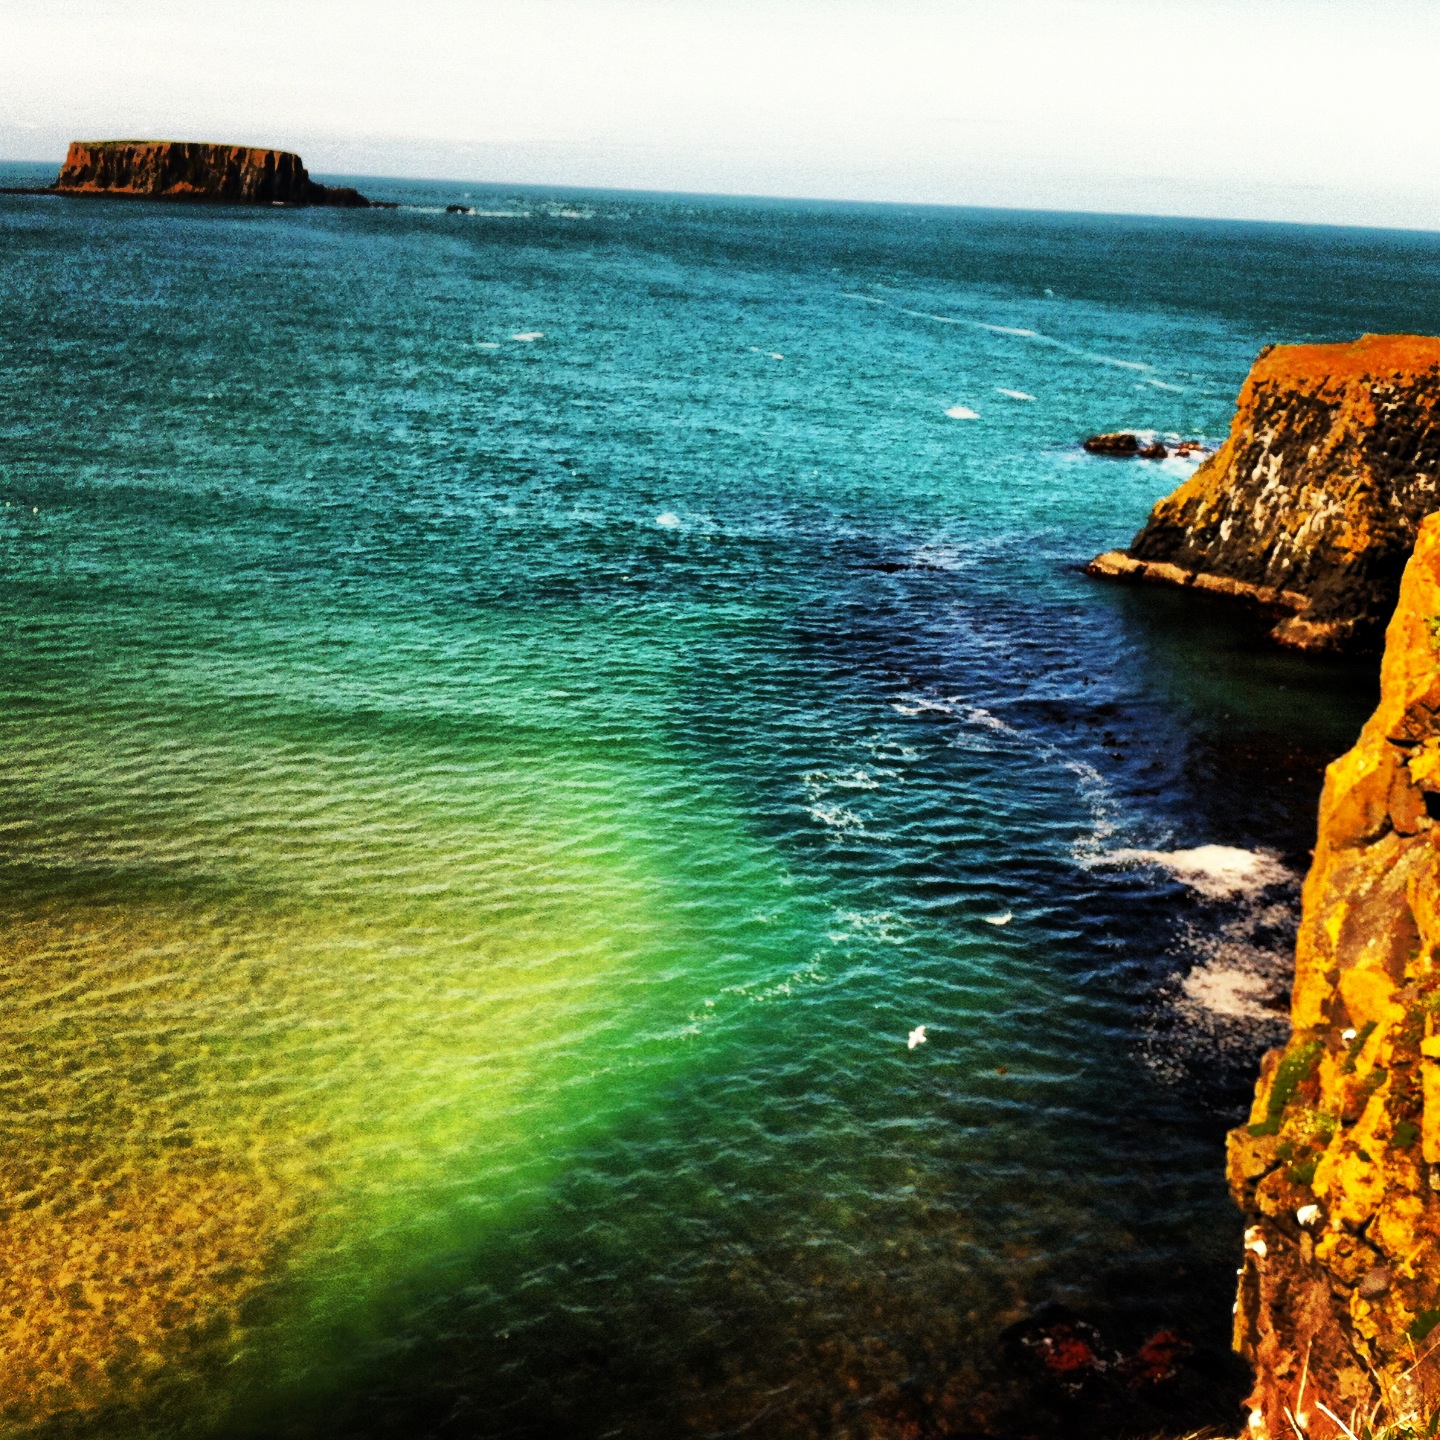 Carrick-a-Rede: a Rope Bridge & the Brightly Colored Ocean – The Roaming  Bean